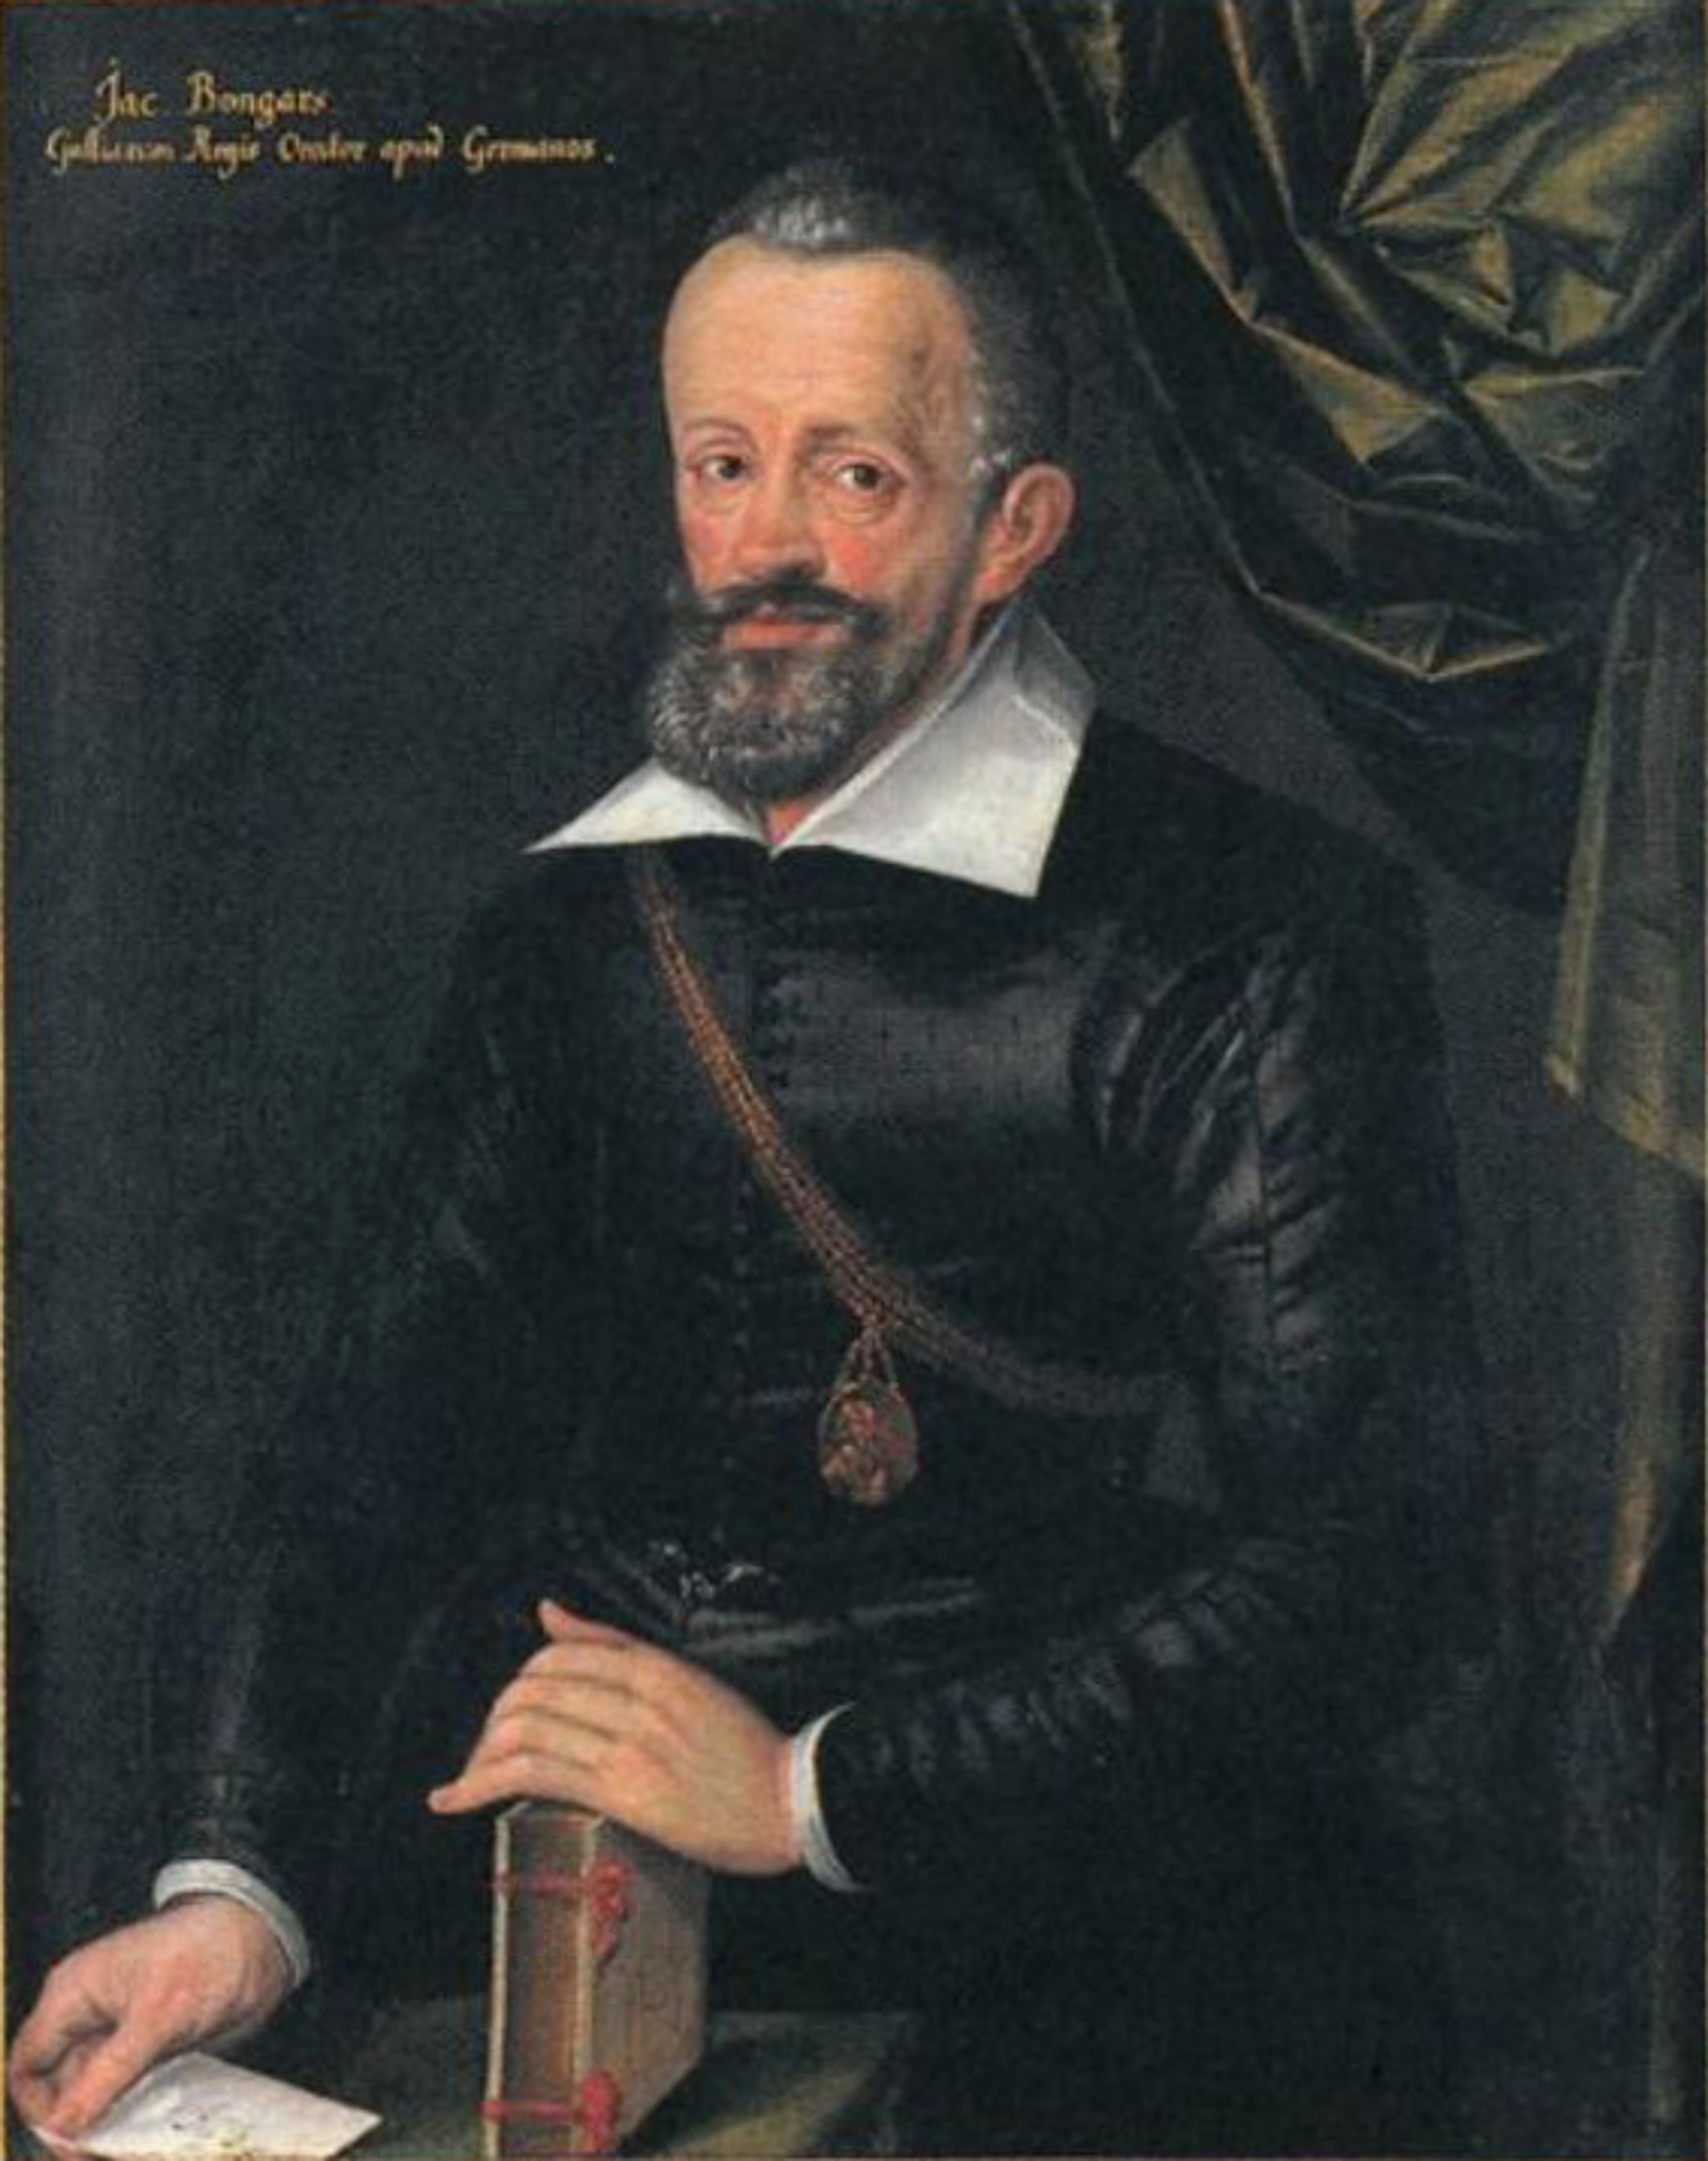 An oil painting of a Caucasian man with grey hair and beard, wearing black clothes featuring a white, square colour. He stands behind a desk that is just visible, and is holding a book in his left hand and a white piece of paper in his right hand. Green drapery decorates the top right of the painting. The subject's name is written on the top left.